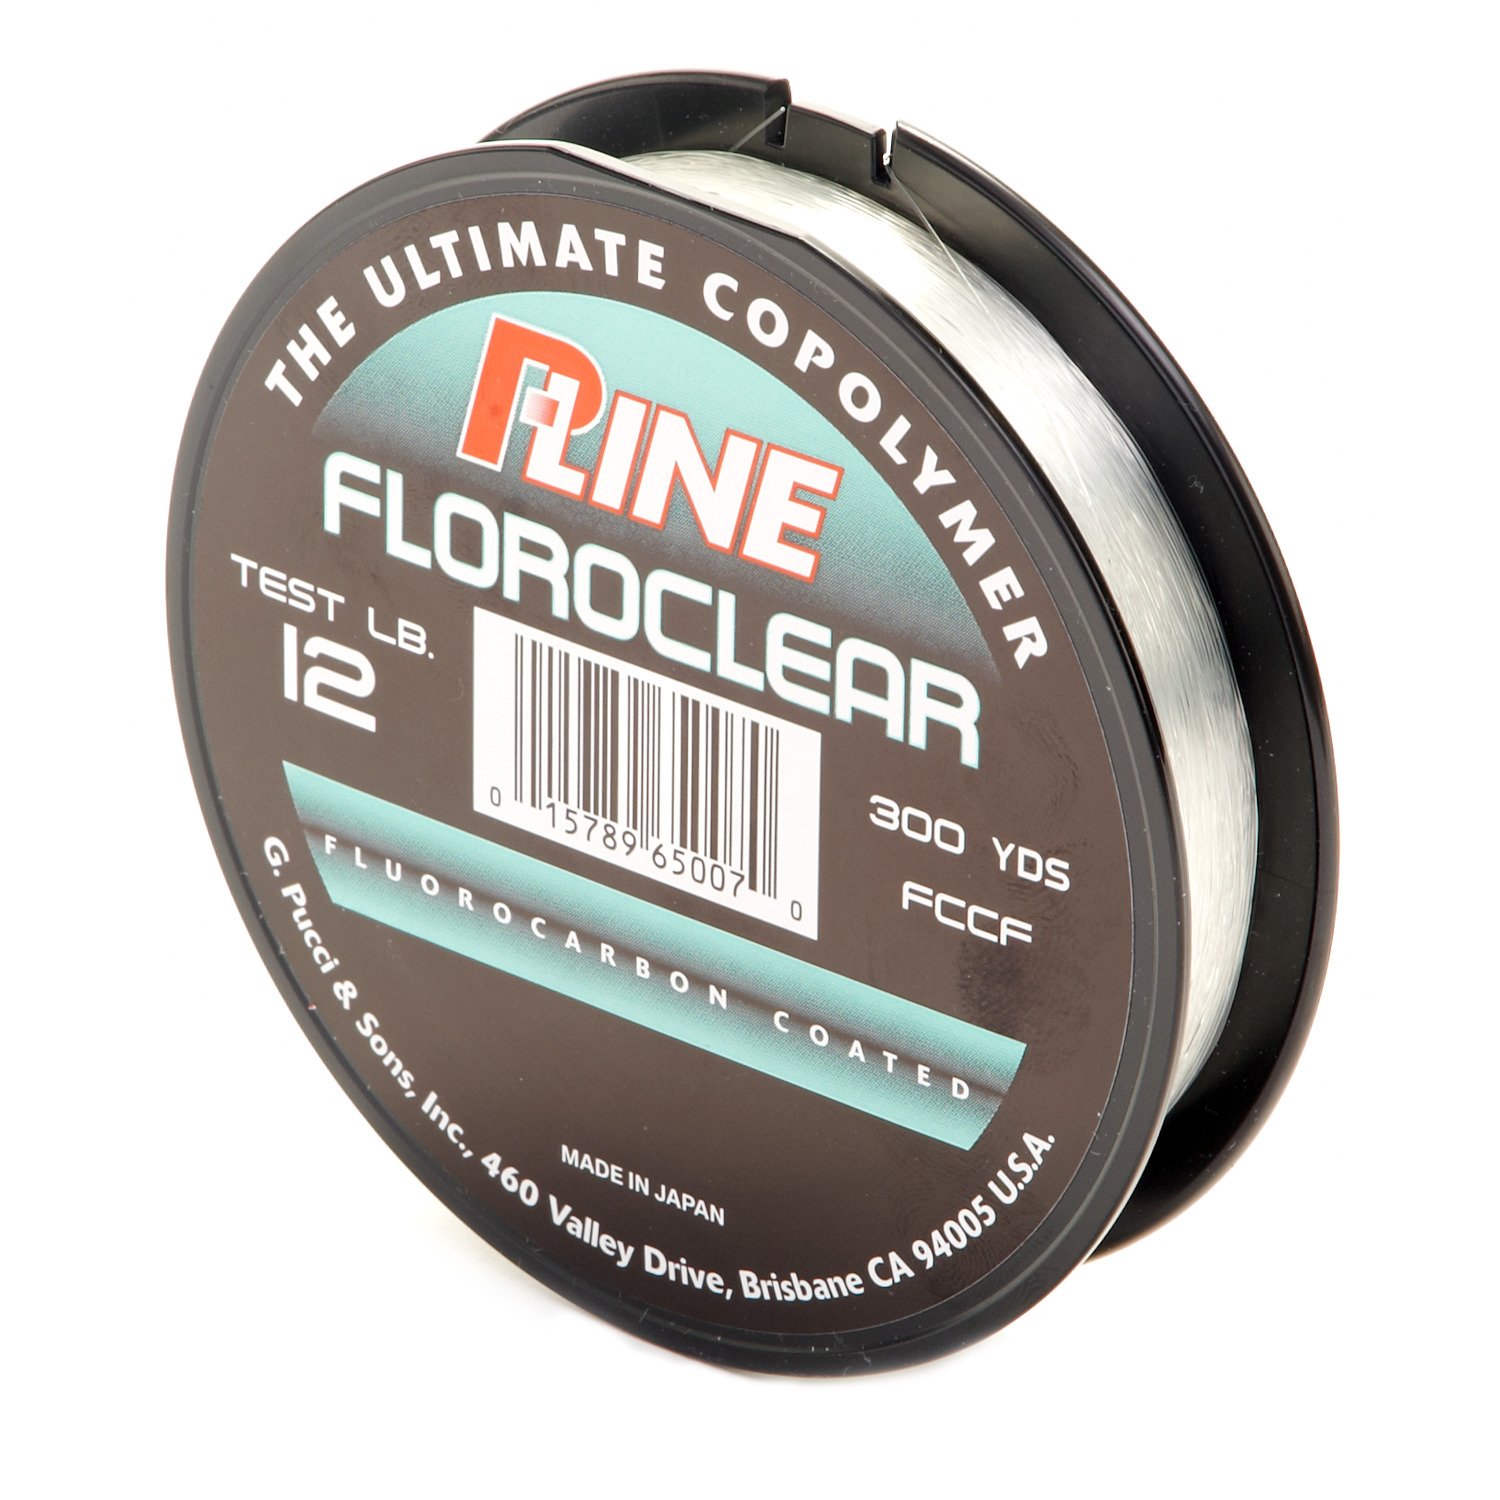 pline clear floroclear fluorocarbon coated line 20lb 600 yd NEW p line